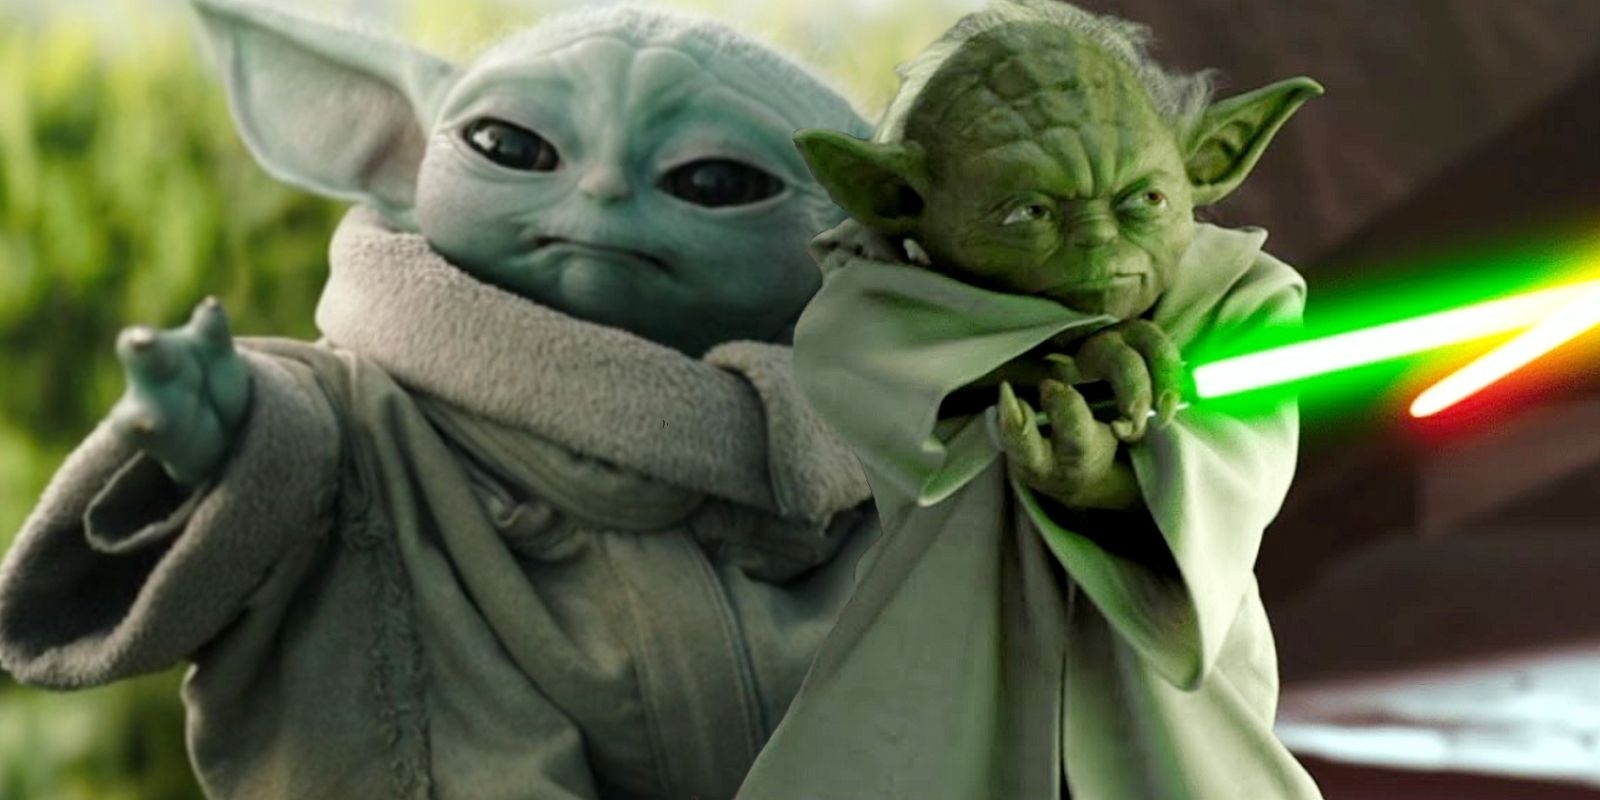 Grogu in The Book of Boba Fett and Yoda in Attack of the Clones.